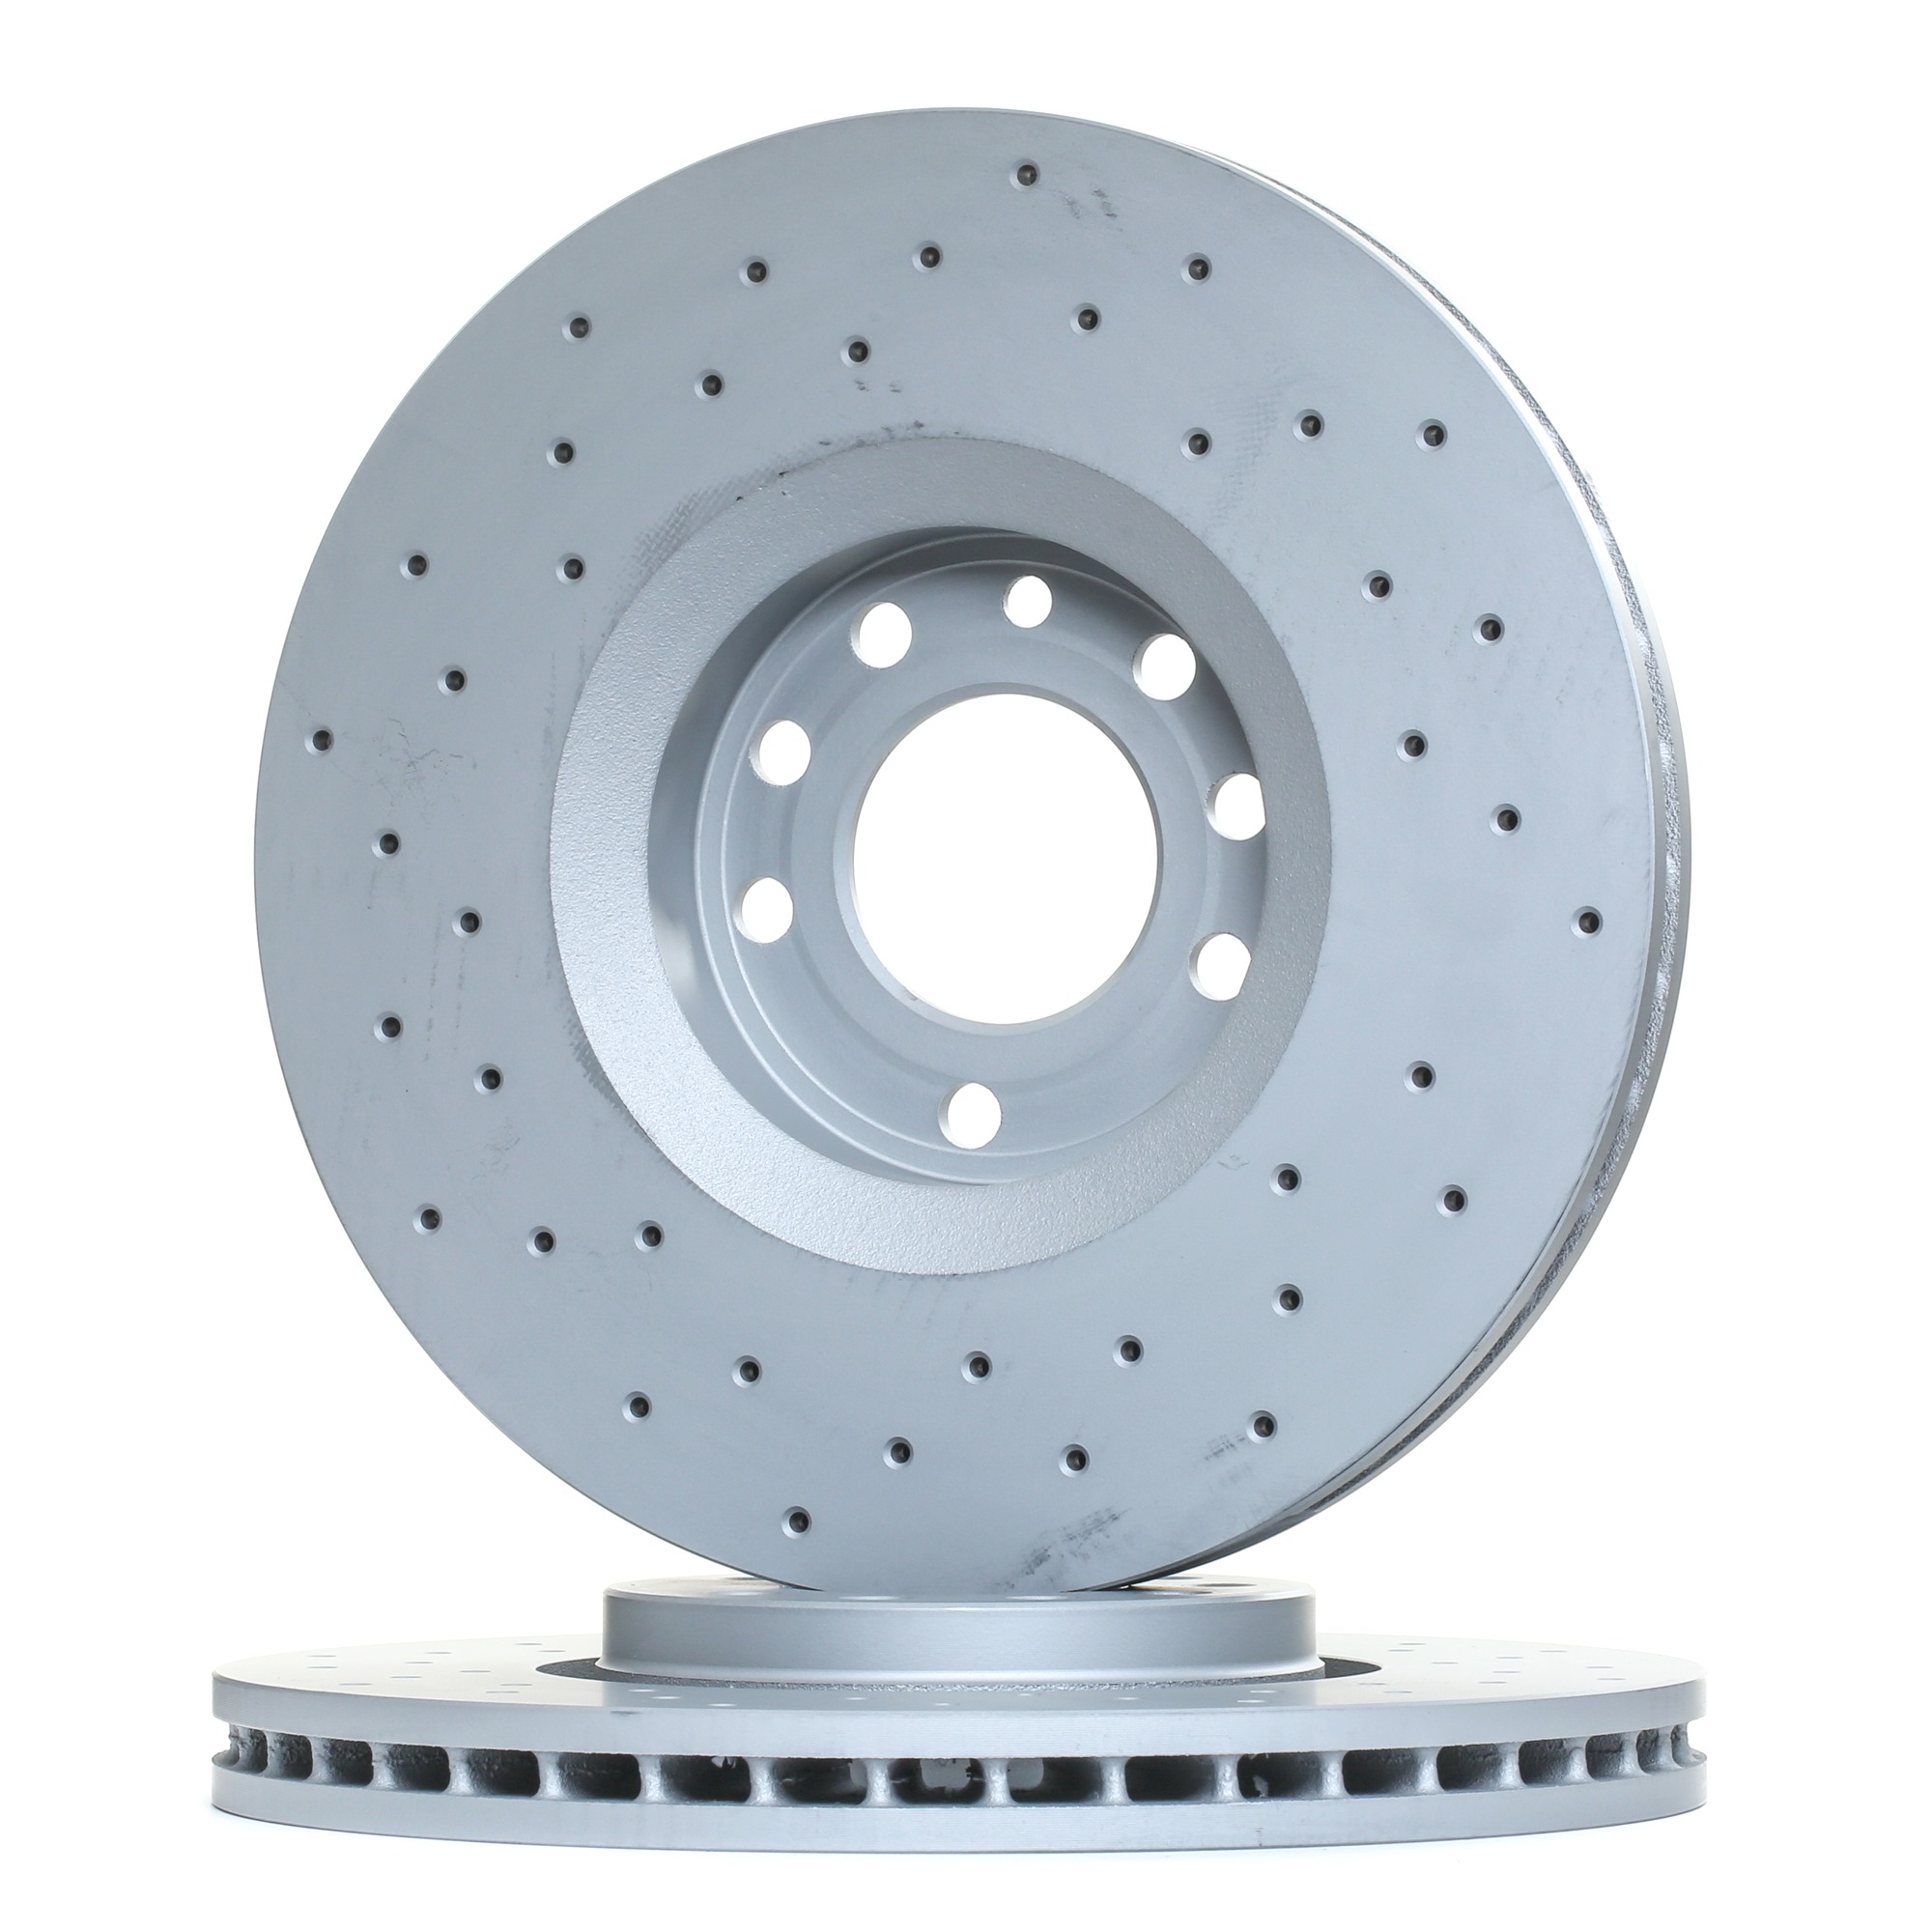 430.1499.52 ZIMMERMANN Brake rotors OPEL 314x28mm, 8/5, 5x110, Externally Vented, Perforated, Coated, High-carbon